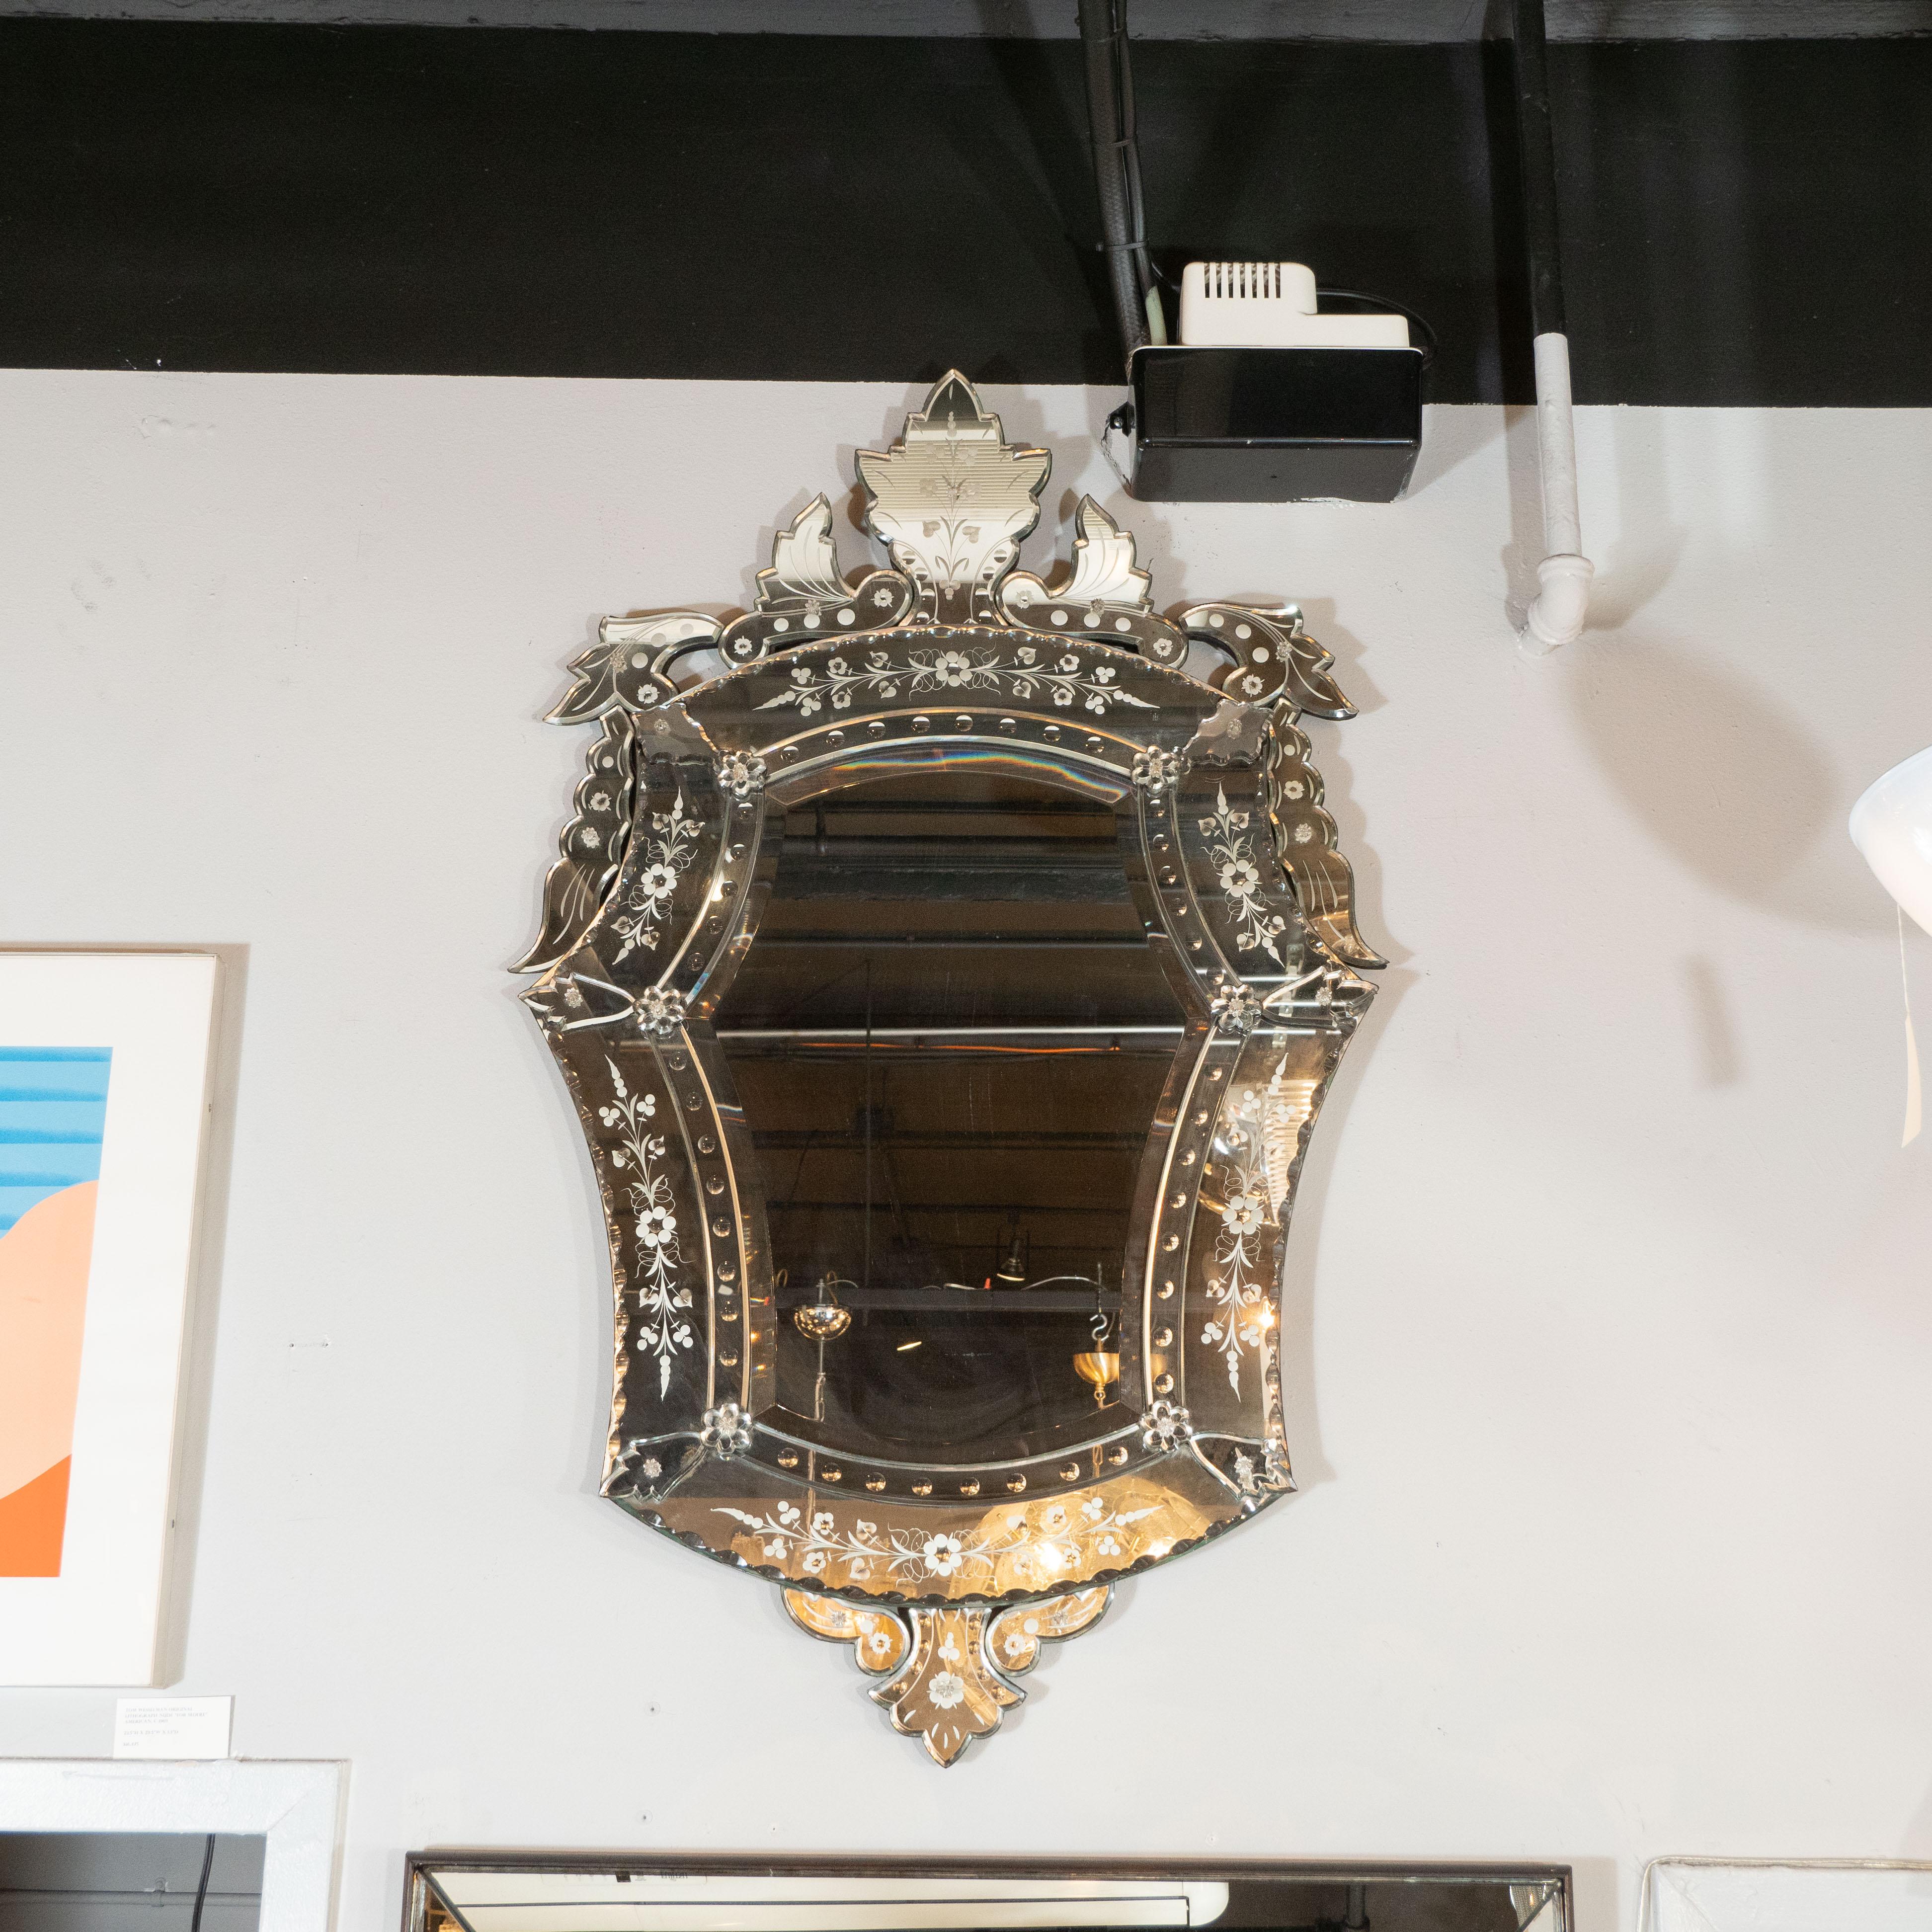 This glamorous mirror was realized in Italy, circa 1950. It offers a cartouche form with mirrored forms resembling stylized leaves adorning the perimeter of the piece. The mirror offers etched foliate detailing throughout as well chain and bevelled